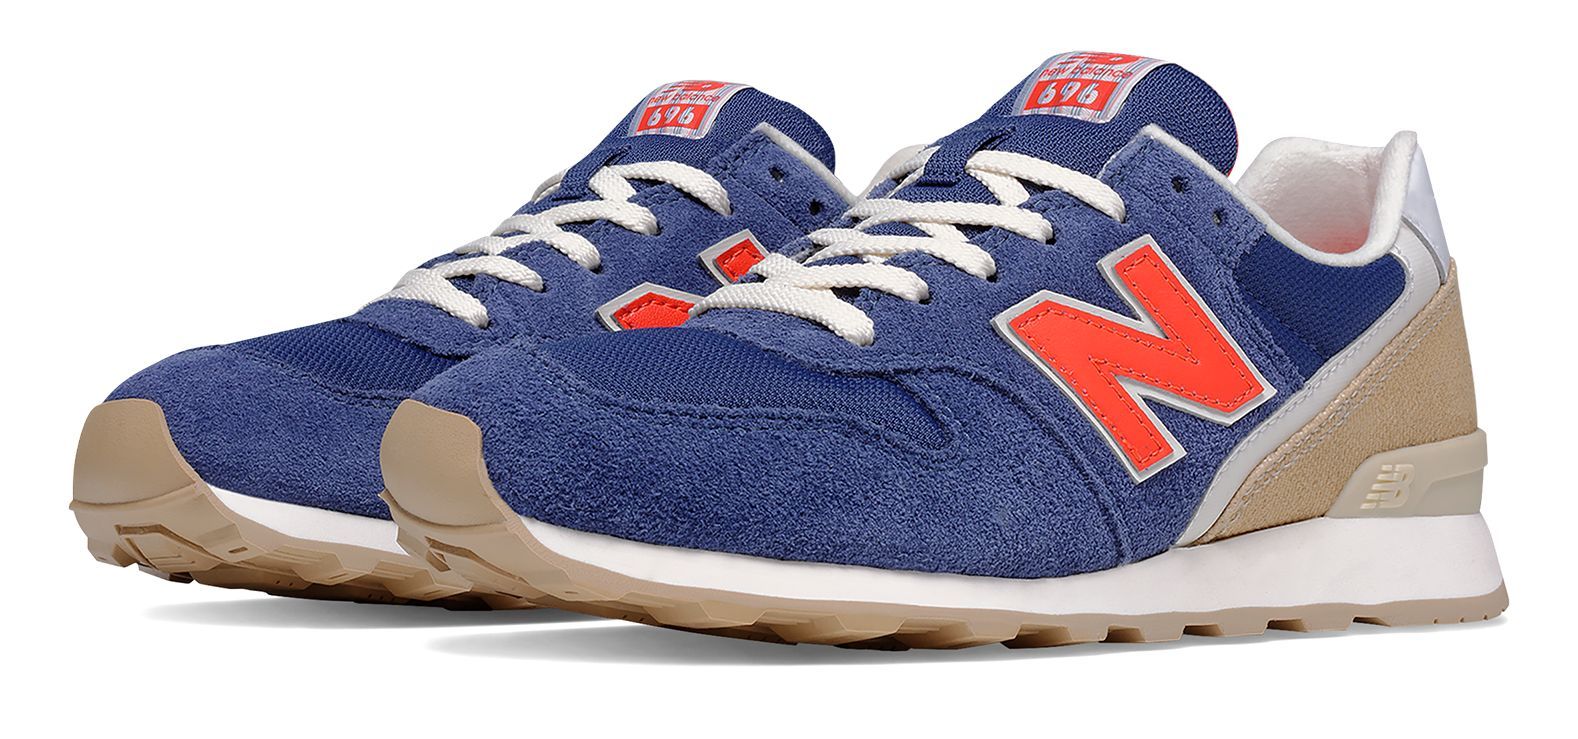 New Balance 696 Lakeview Womens Shoes Blue with Red & Tan | Joes New Balance Outlet